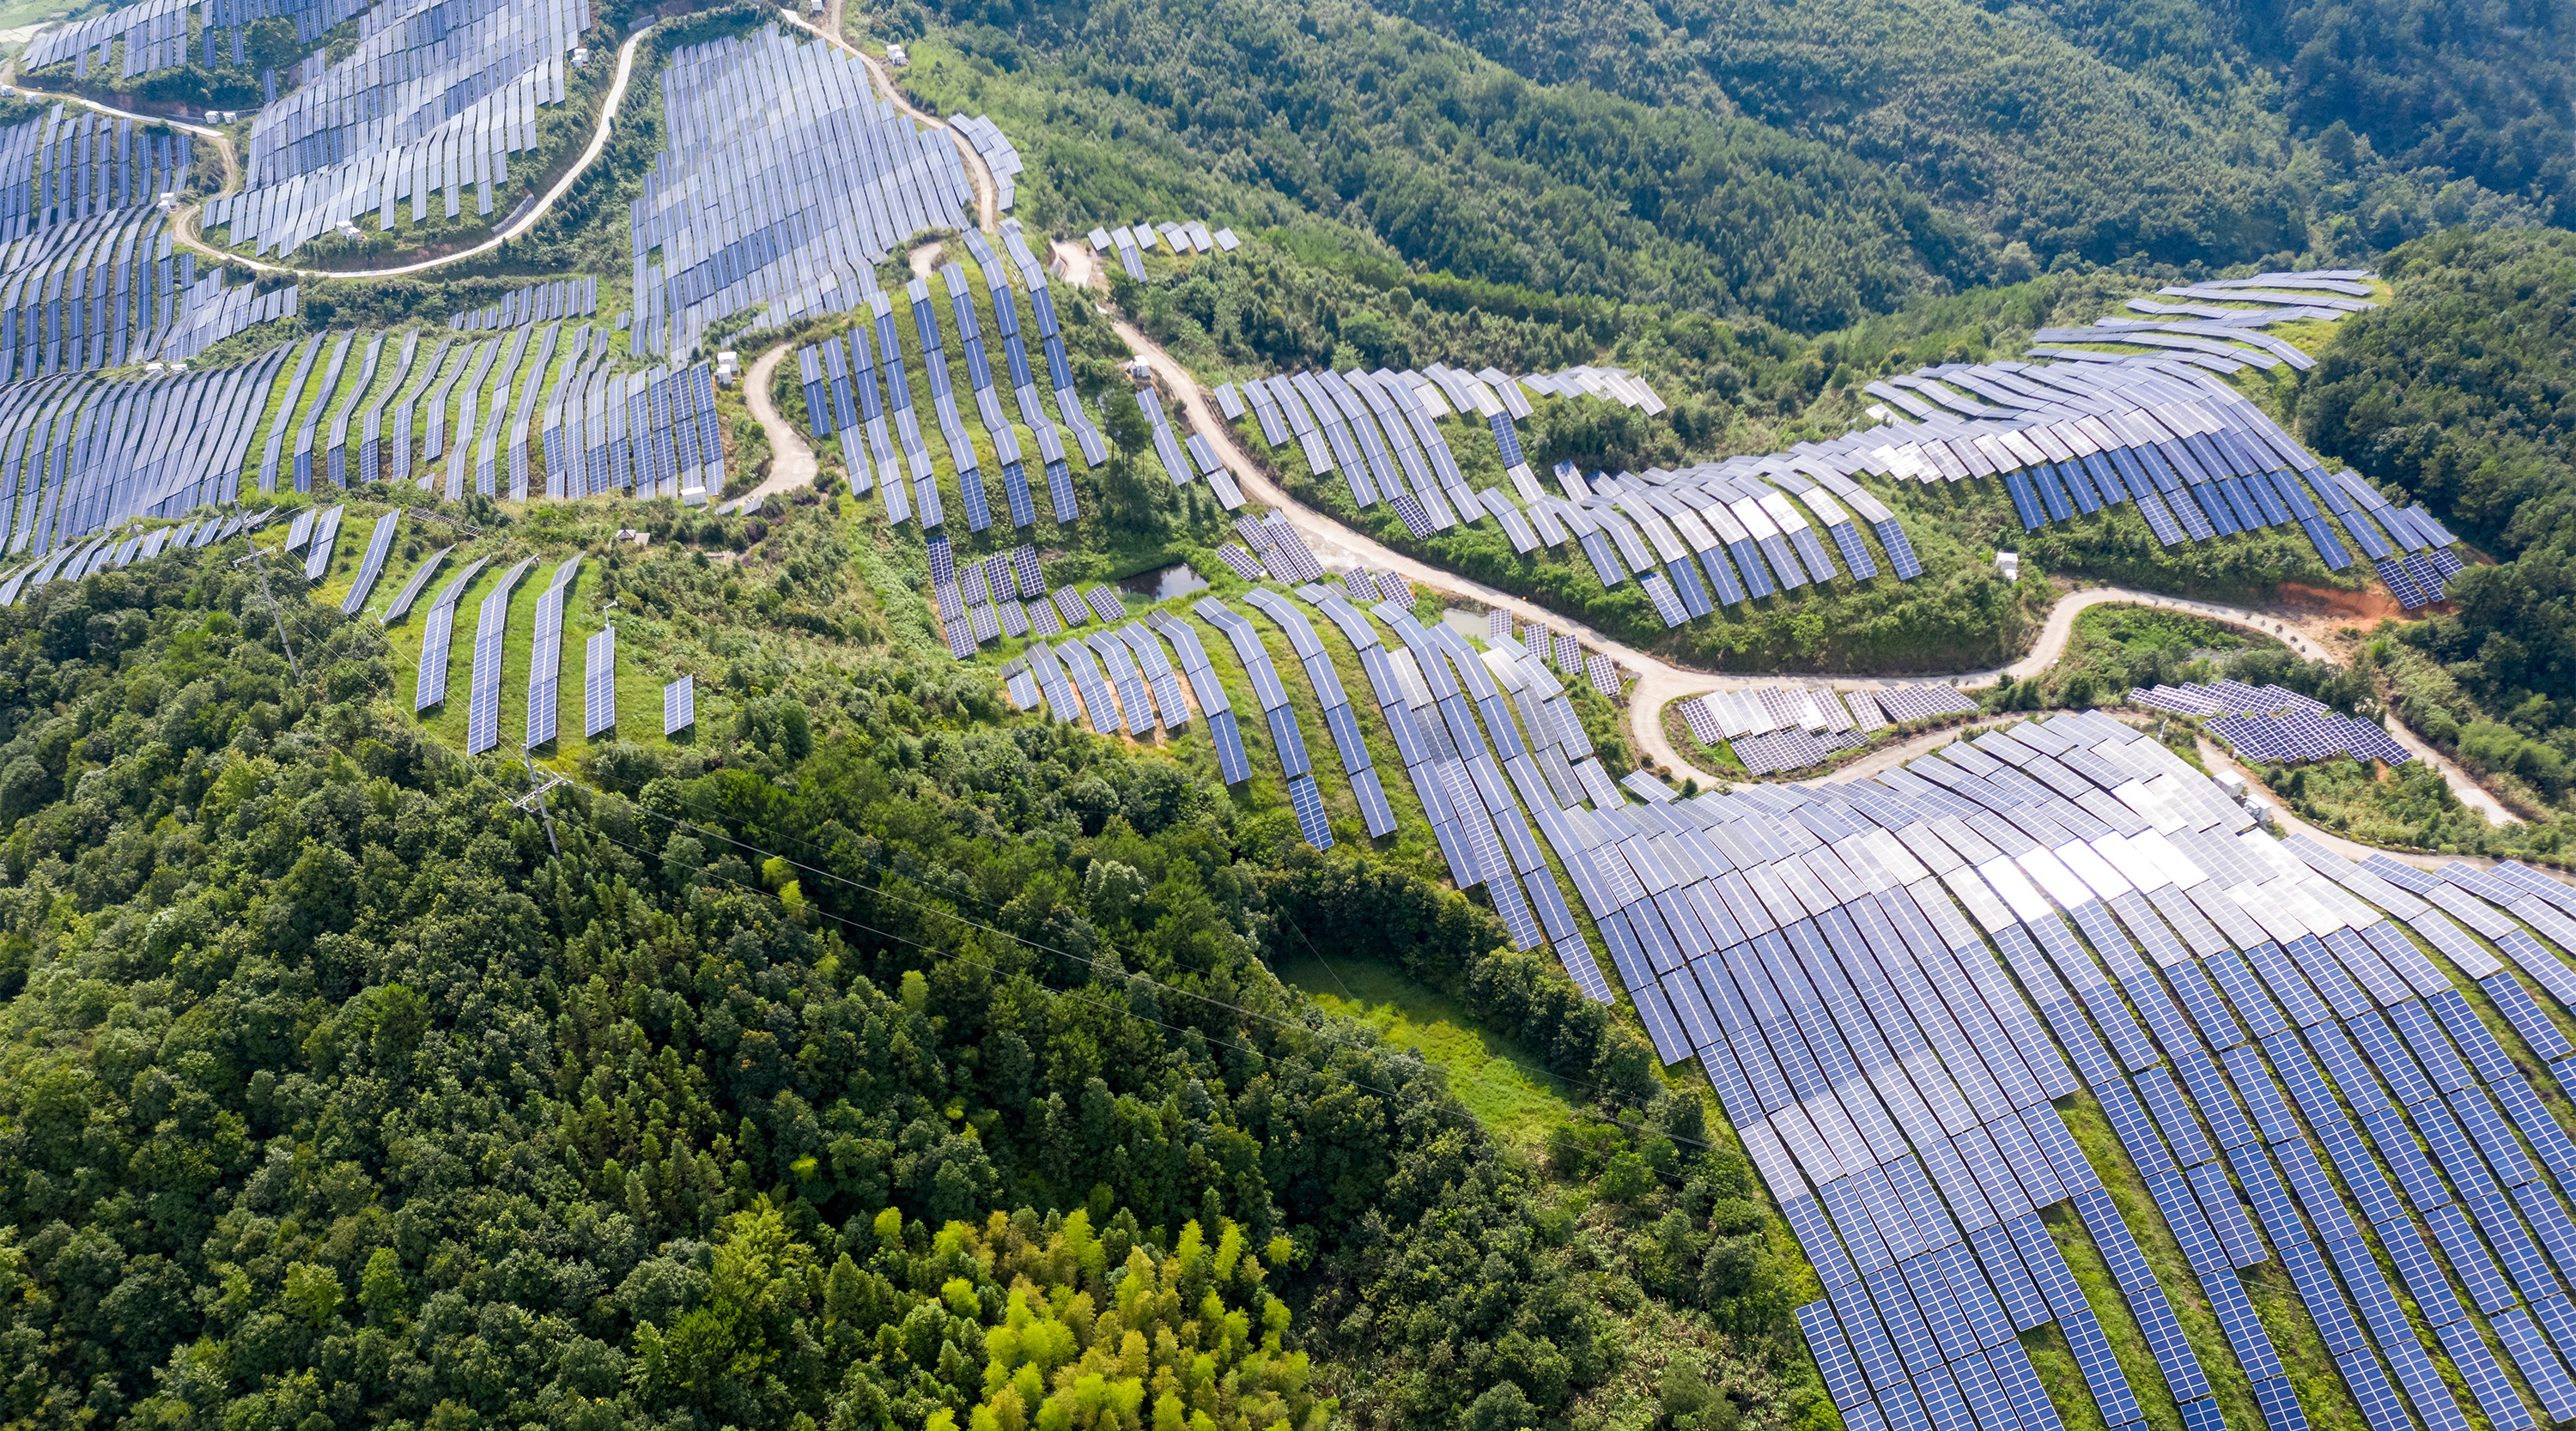 A large array of solar panels amongst forests spanning a hill